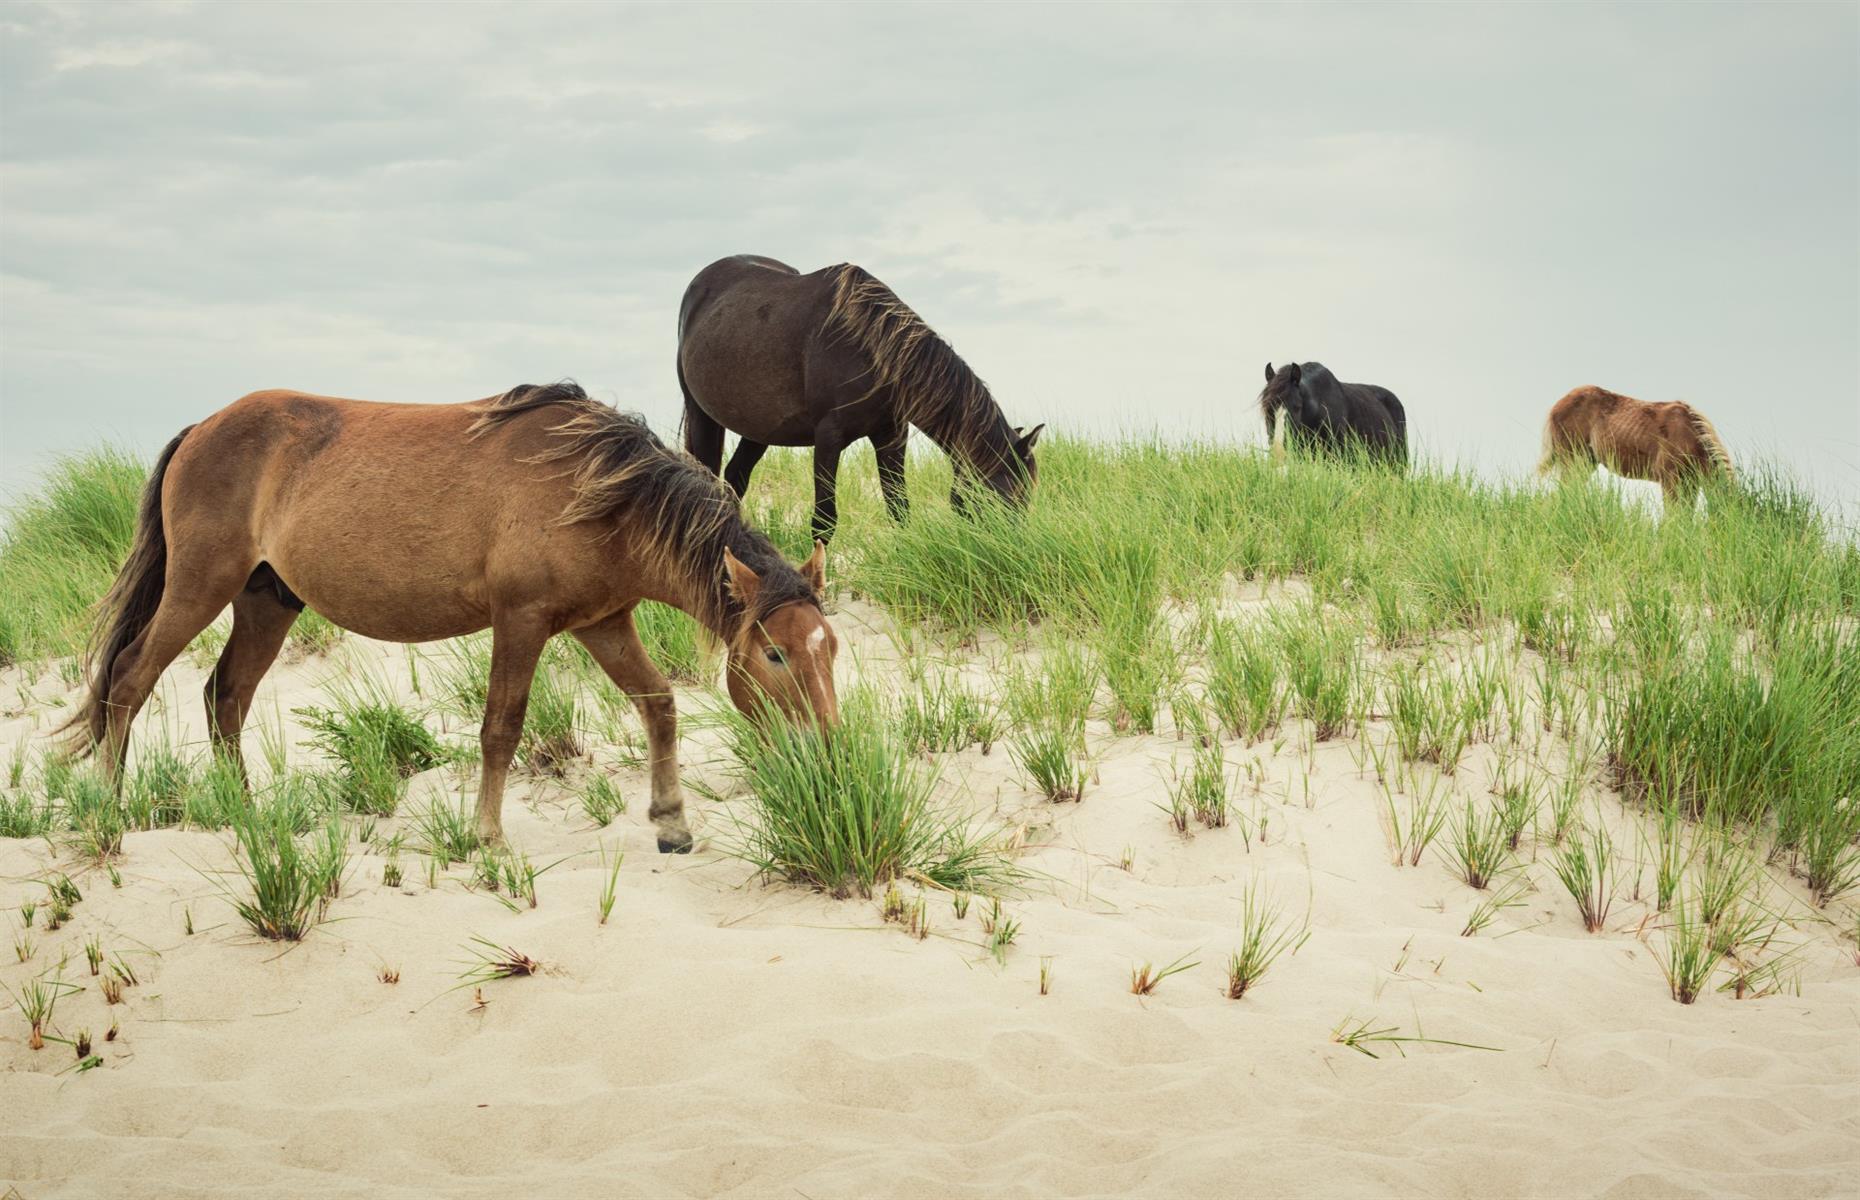 <p><a href="https://www.pc.gc.ca/en/pn-np/ns/sable">Sable Island</a> is remote – so remote that visitors can only access it by air or by sea, on a private vessel or through a plane or helicopter tour. The crescent-shaped island sits 109 miles (175km) from mainland Nova Scotia and acts as a refuge for some 500 wild horses that are thought to have been introduced in the 1730s. Wholly isolated and ruggedly beautiful, the beach-lined island is also home to the world’s largest breeding colony of gray seals.</p>